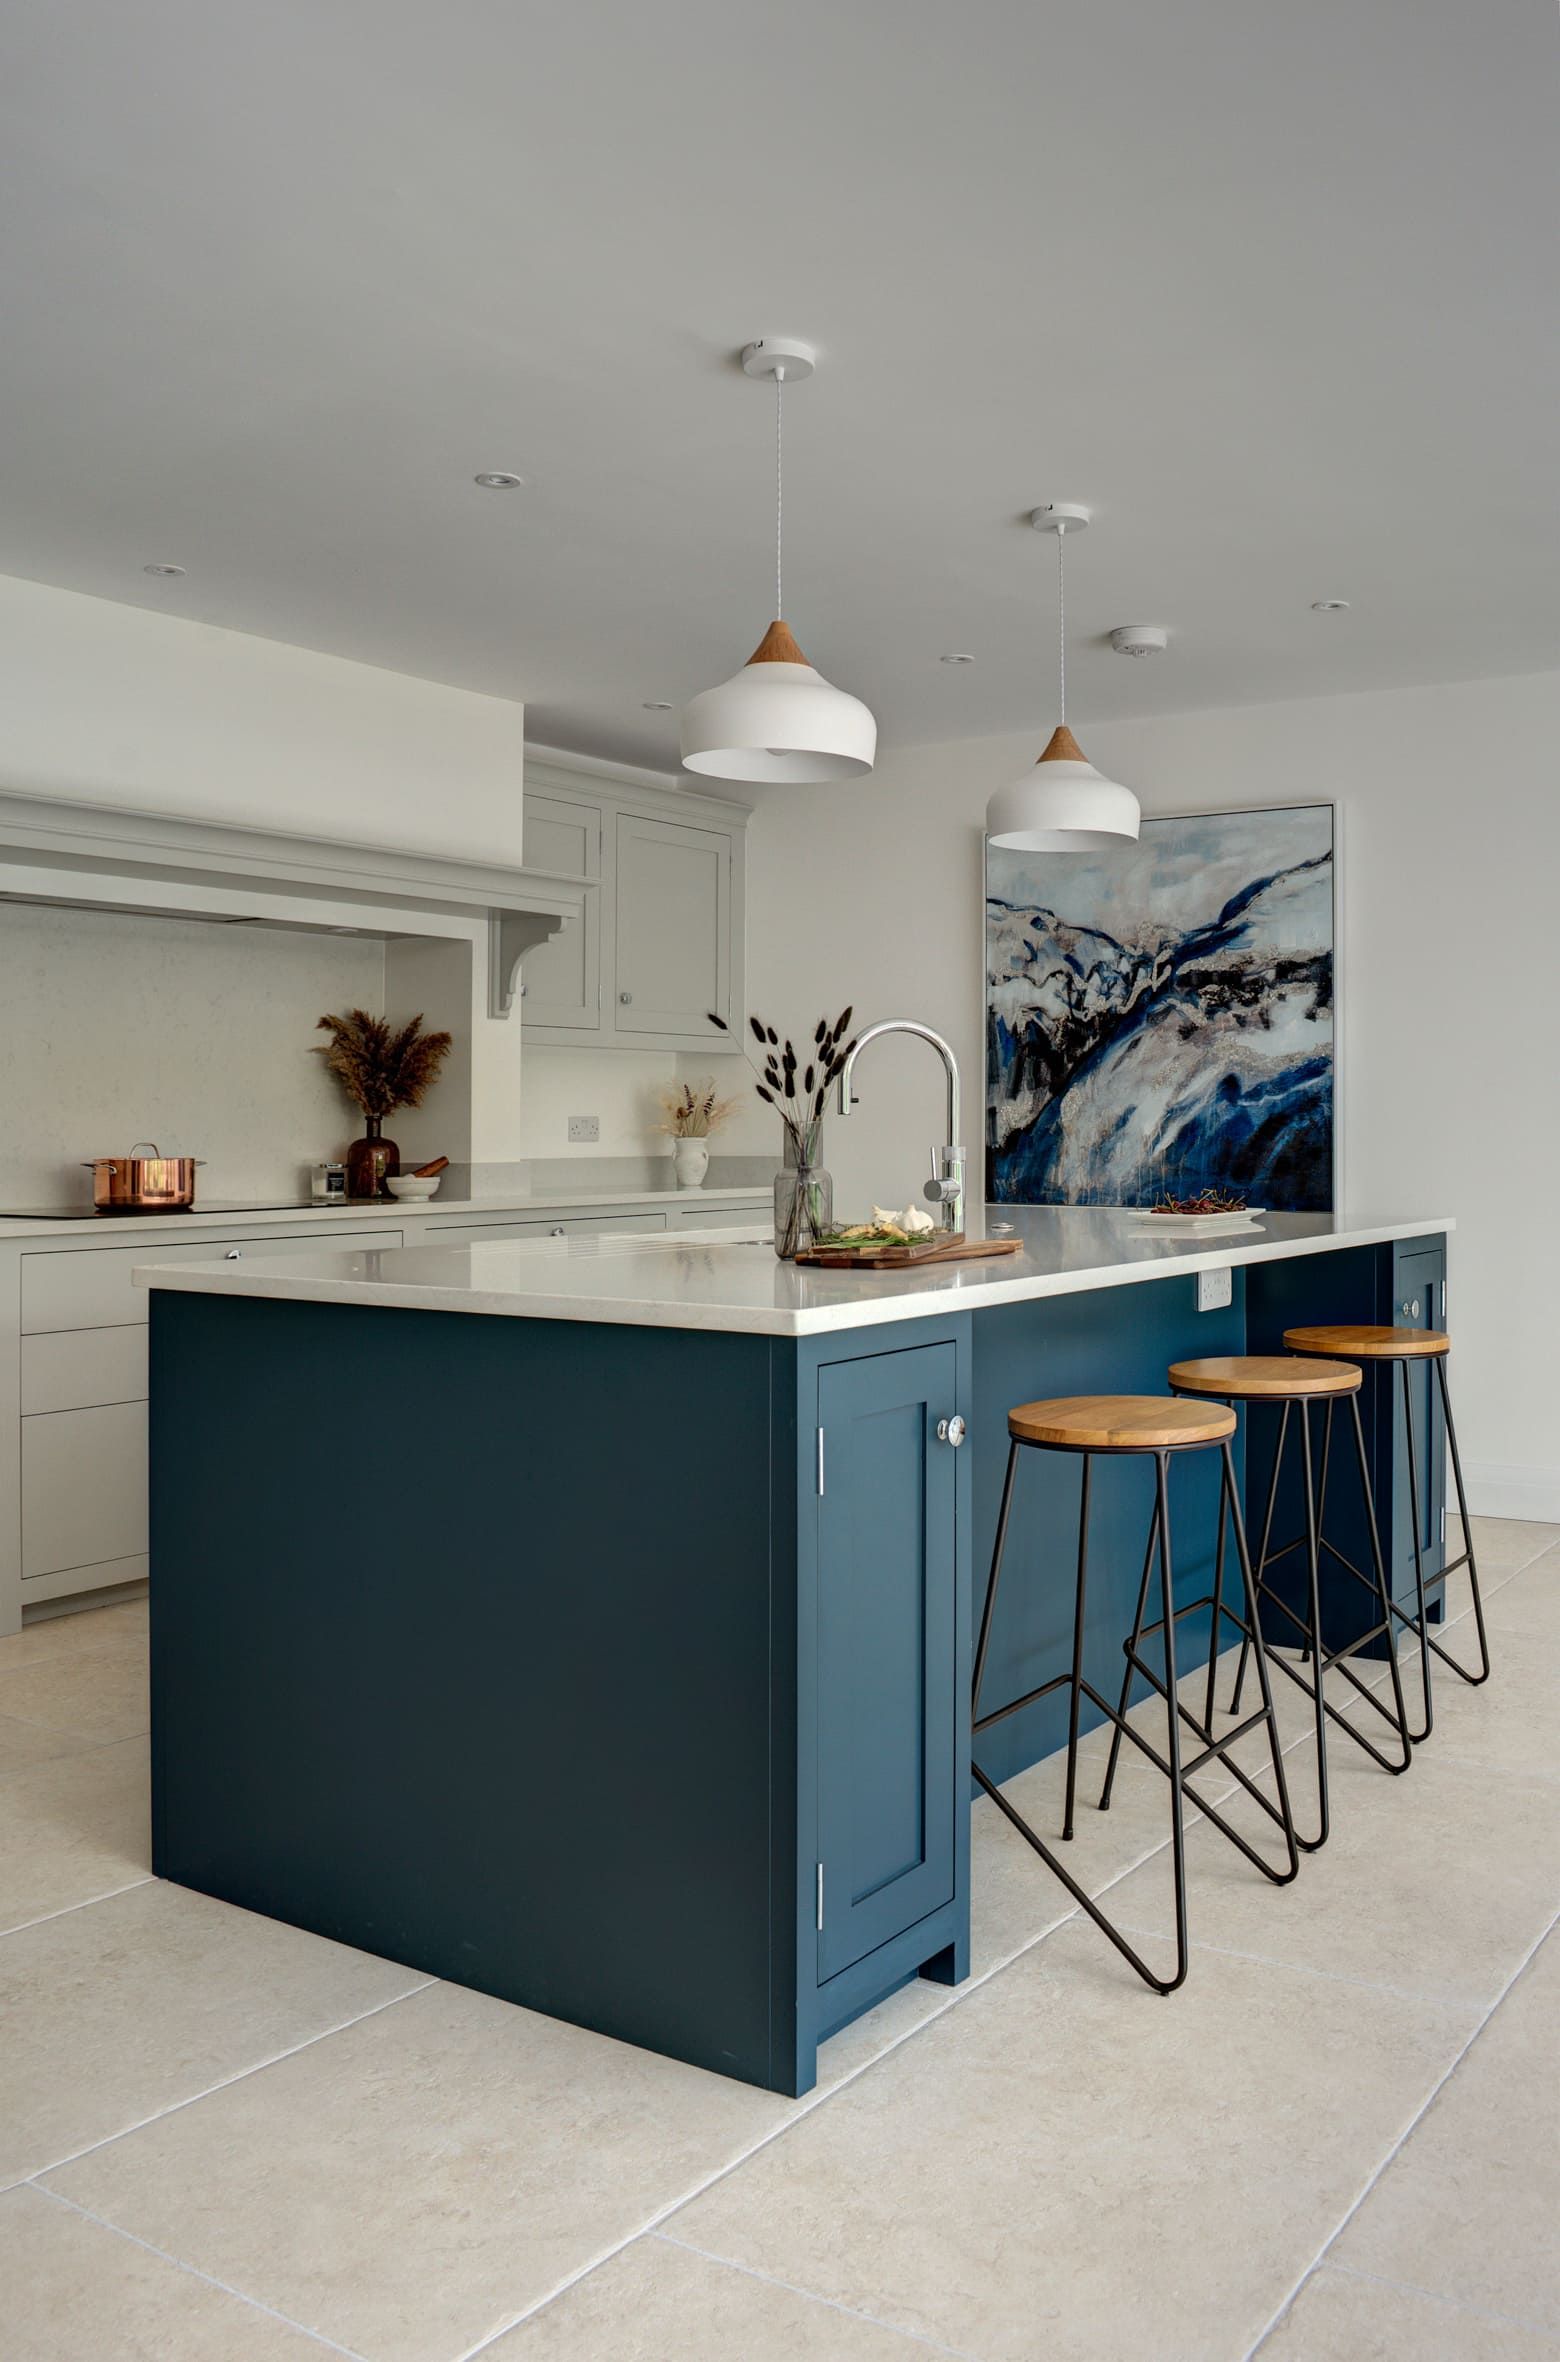 A modern bespoke kitchen design featuring a central island with a contrasting dark blue base and a white countertop. Three wooden bar stools with black metal legs are placed at the island. 